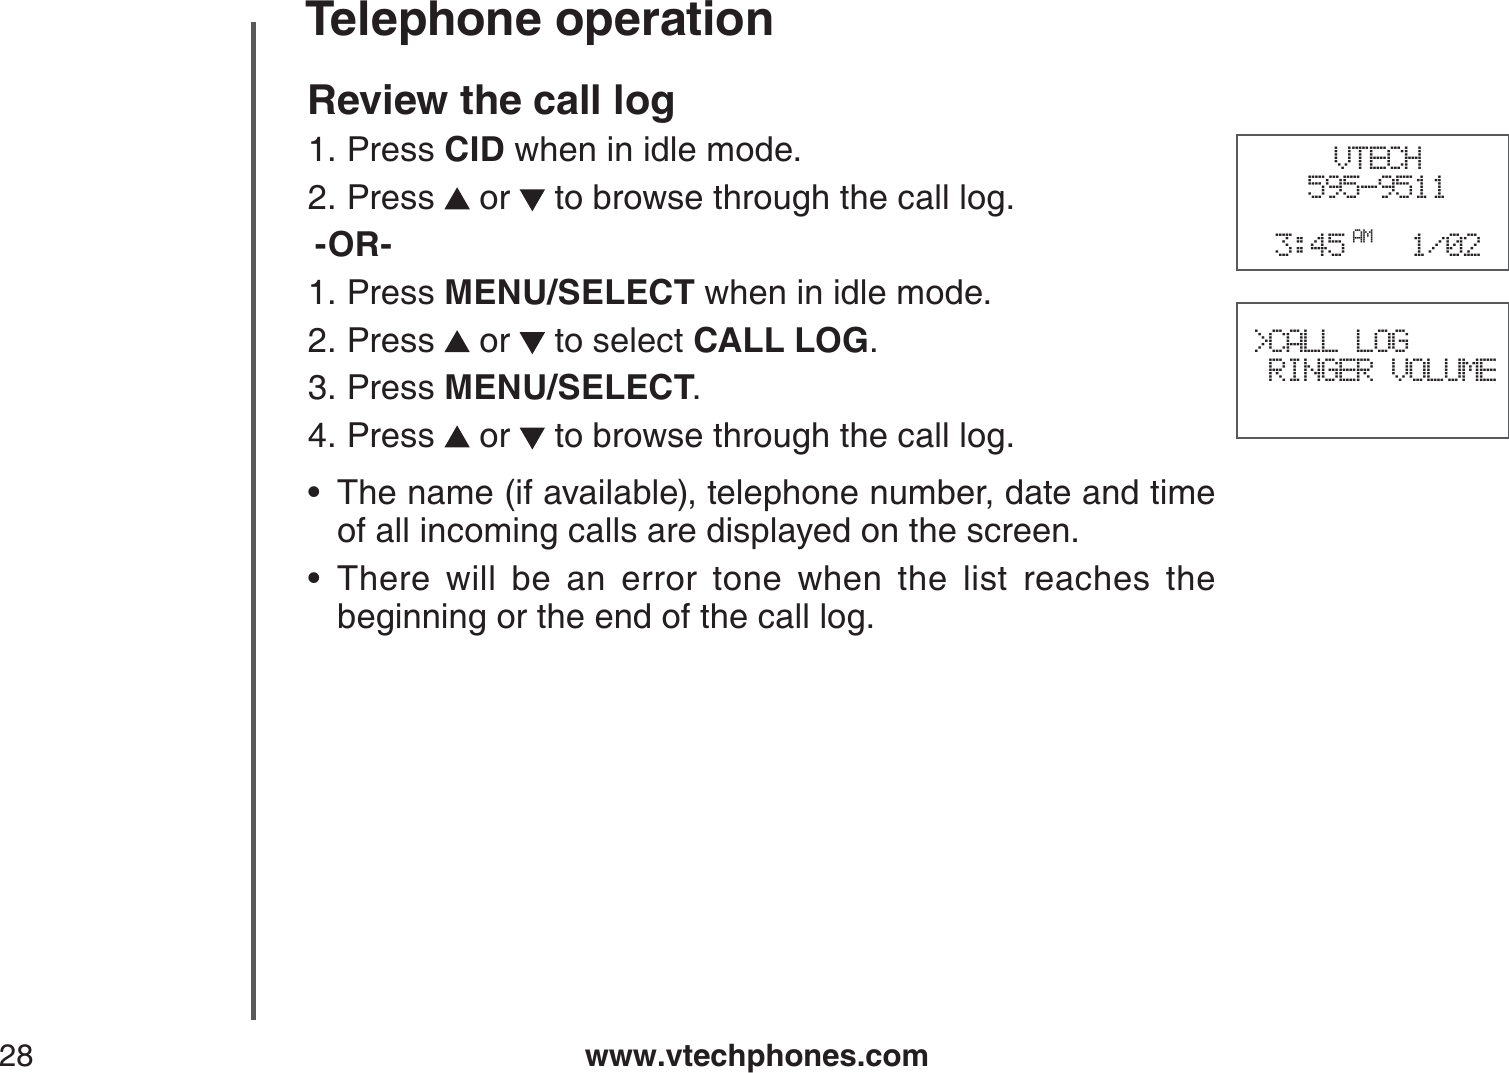 www.vtechphones.com28Telephone operationReview the call log Press CID when in idle mode.Press   or   to browse through the call log.-OR-Press MENU/SELECT when in idle mode.Press   or   to select CALL LOG.Press MENU/SELECT.Press   or   to browse through the call log.The name (if available), telephone number, date and time of all incoming calls are displayed on the screen.There will be an error tone when the list reaches the beginning or the end of the call log.1.2.1.2.3.4.••VTECH595-95113:45 AM 1/02&gt;CALL LOG RINGER VOLUME